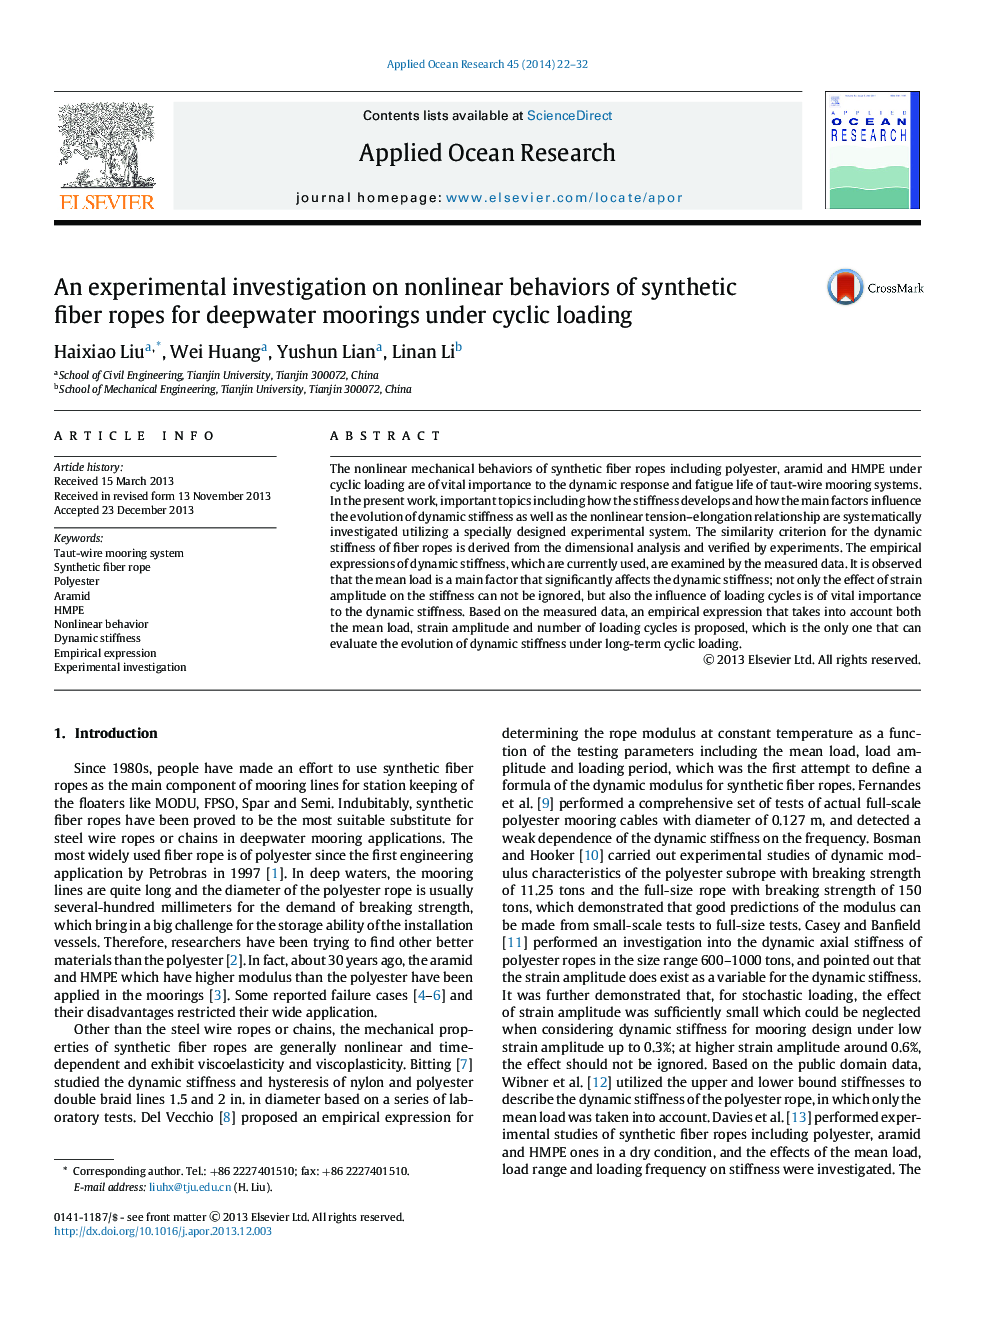 An experimental investigation on nonlinear behaviors of synthetic fiber ropes for deepwater moorings under cyclic loading